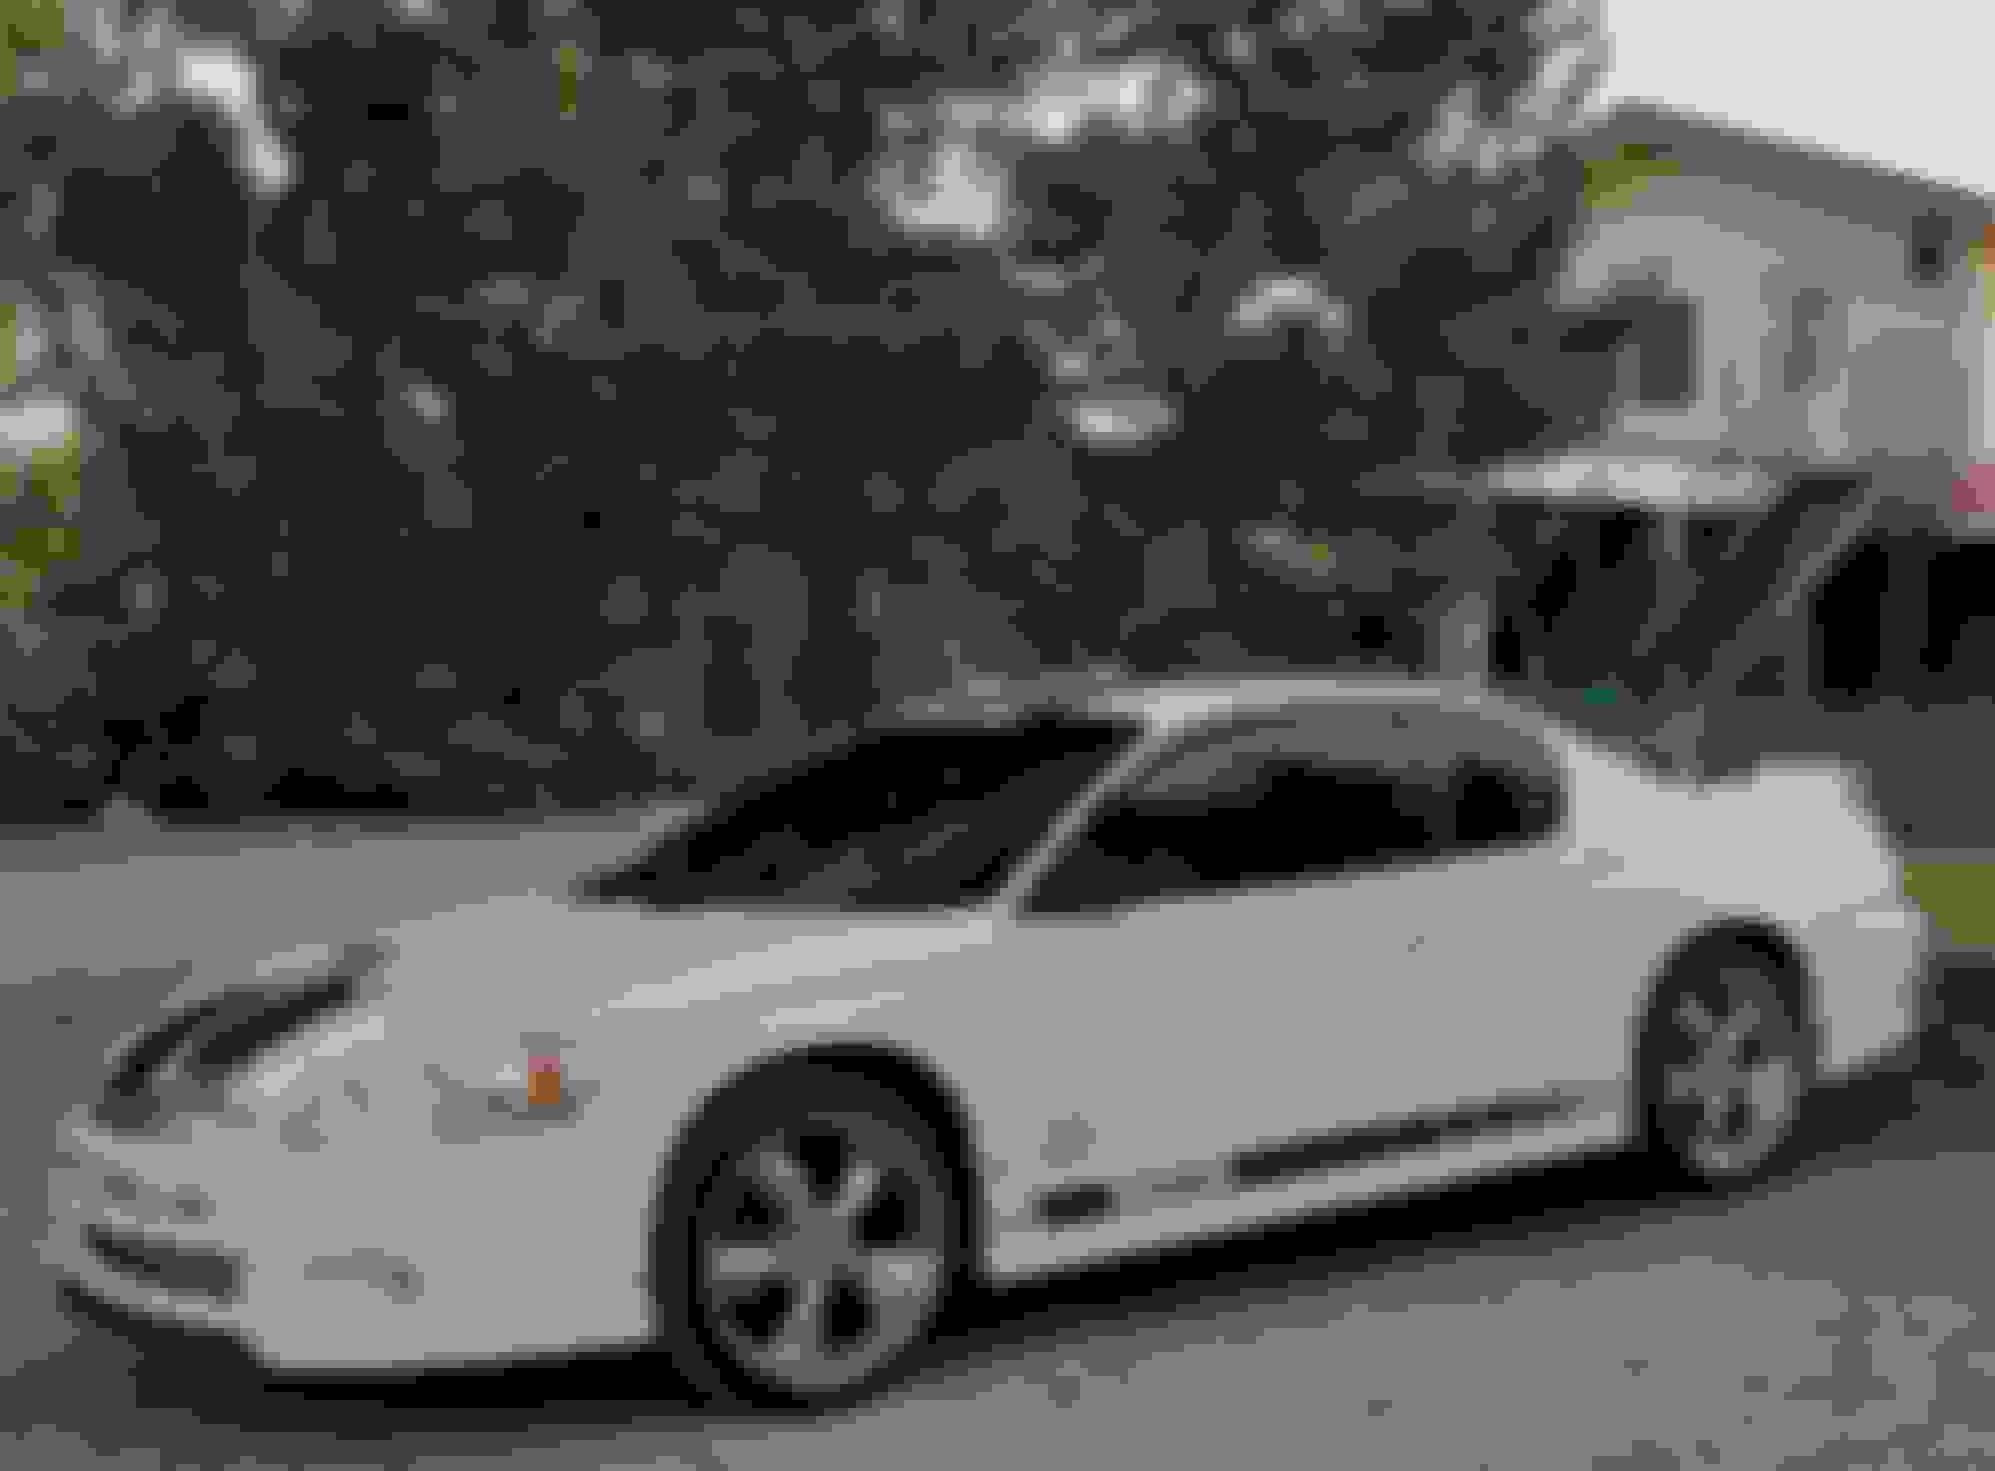 I Bought A 2006 Nascar Pace Car Edition Monte Carlo Ss White Blue About Three Wee Monte Carlo Forum Monte Carlo Enthusiast Forums [ 1471 x 1995 Pixel ]